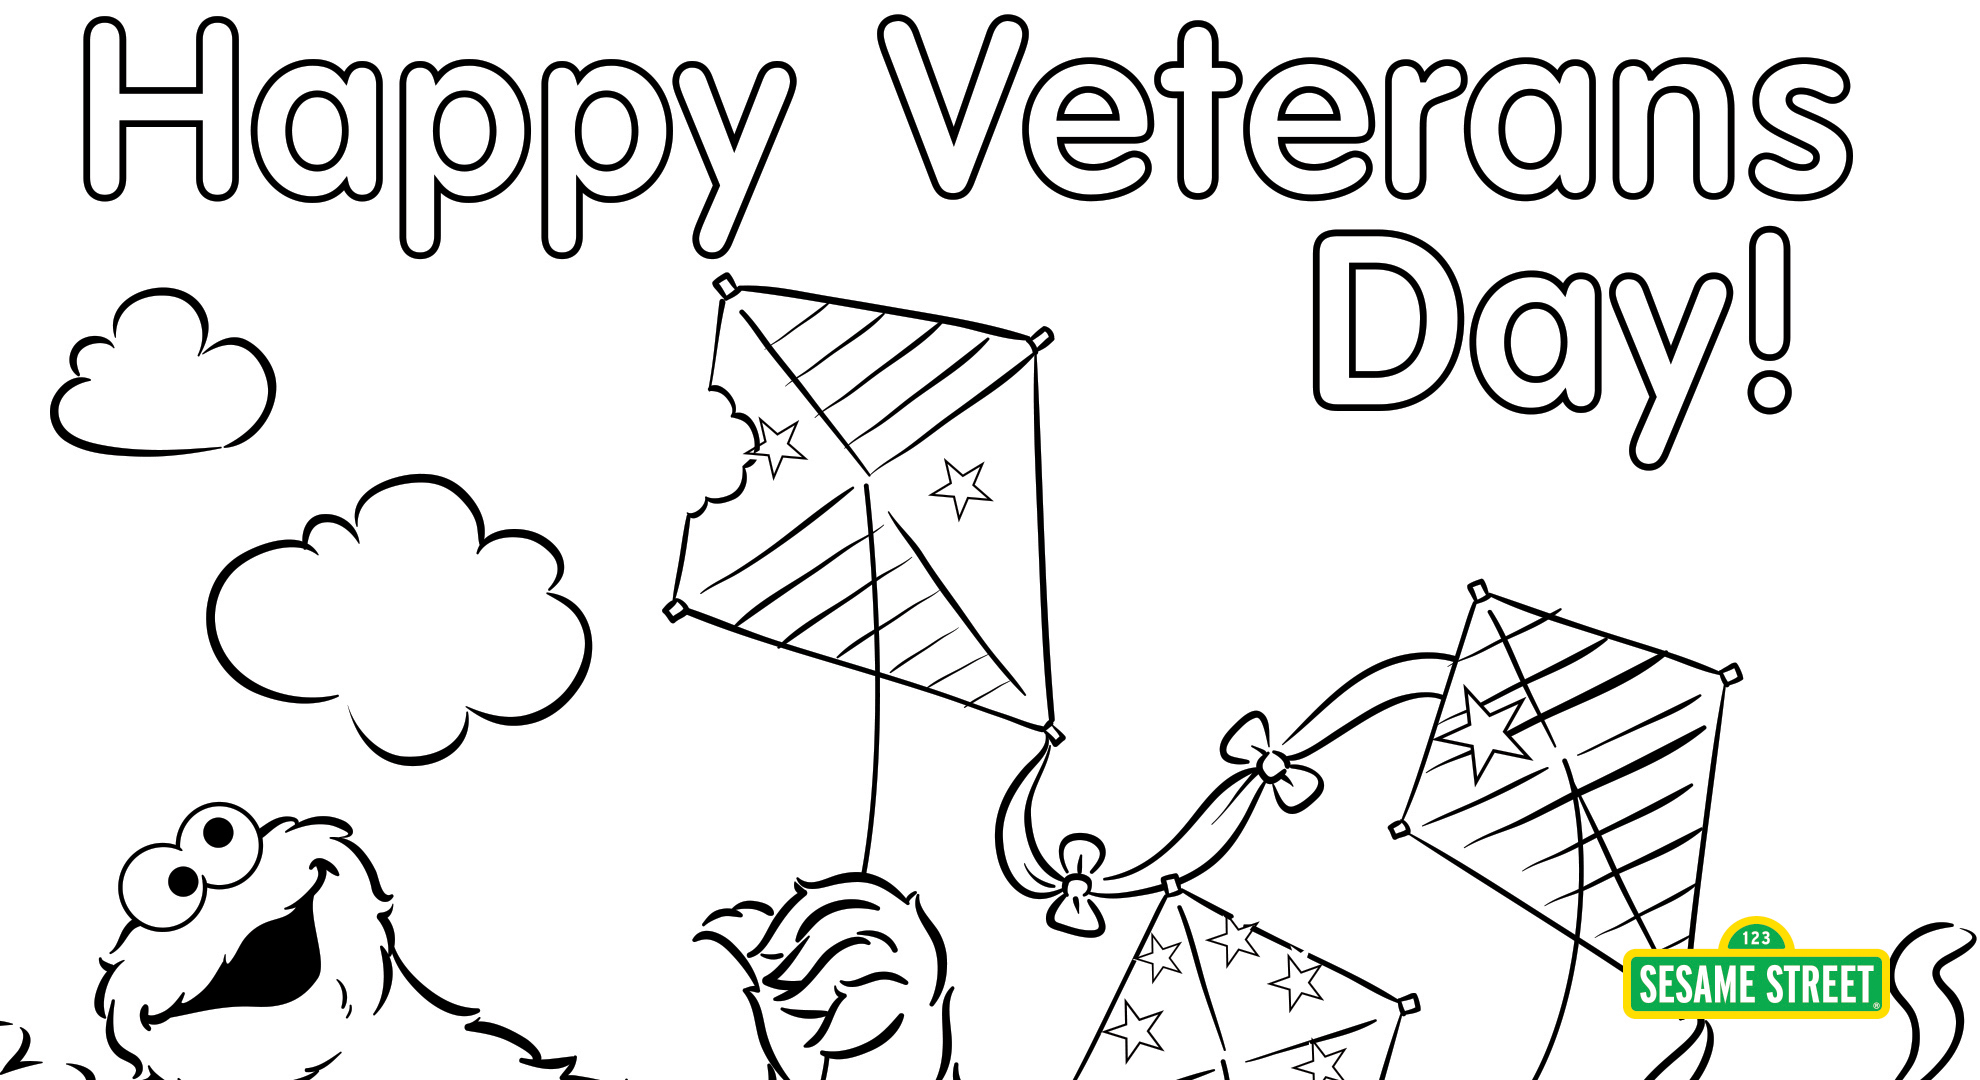 Veterans Day Coloring Pages • Veterans Day Coloring Sheets • Veterans Day  Activities